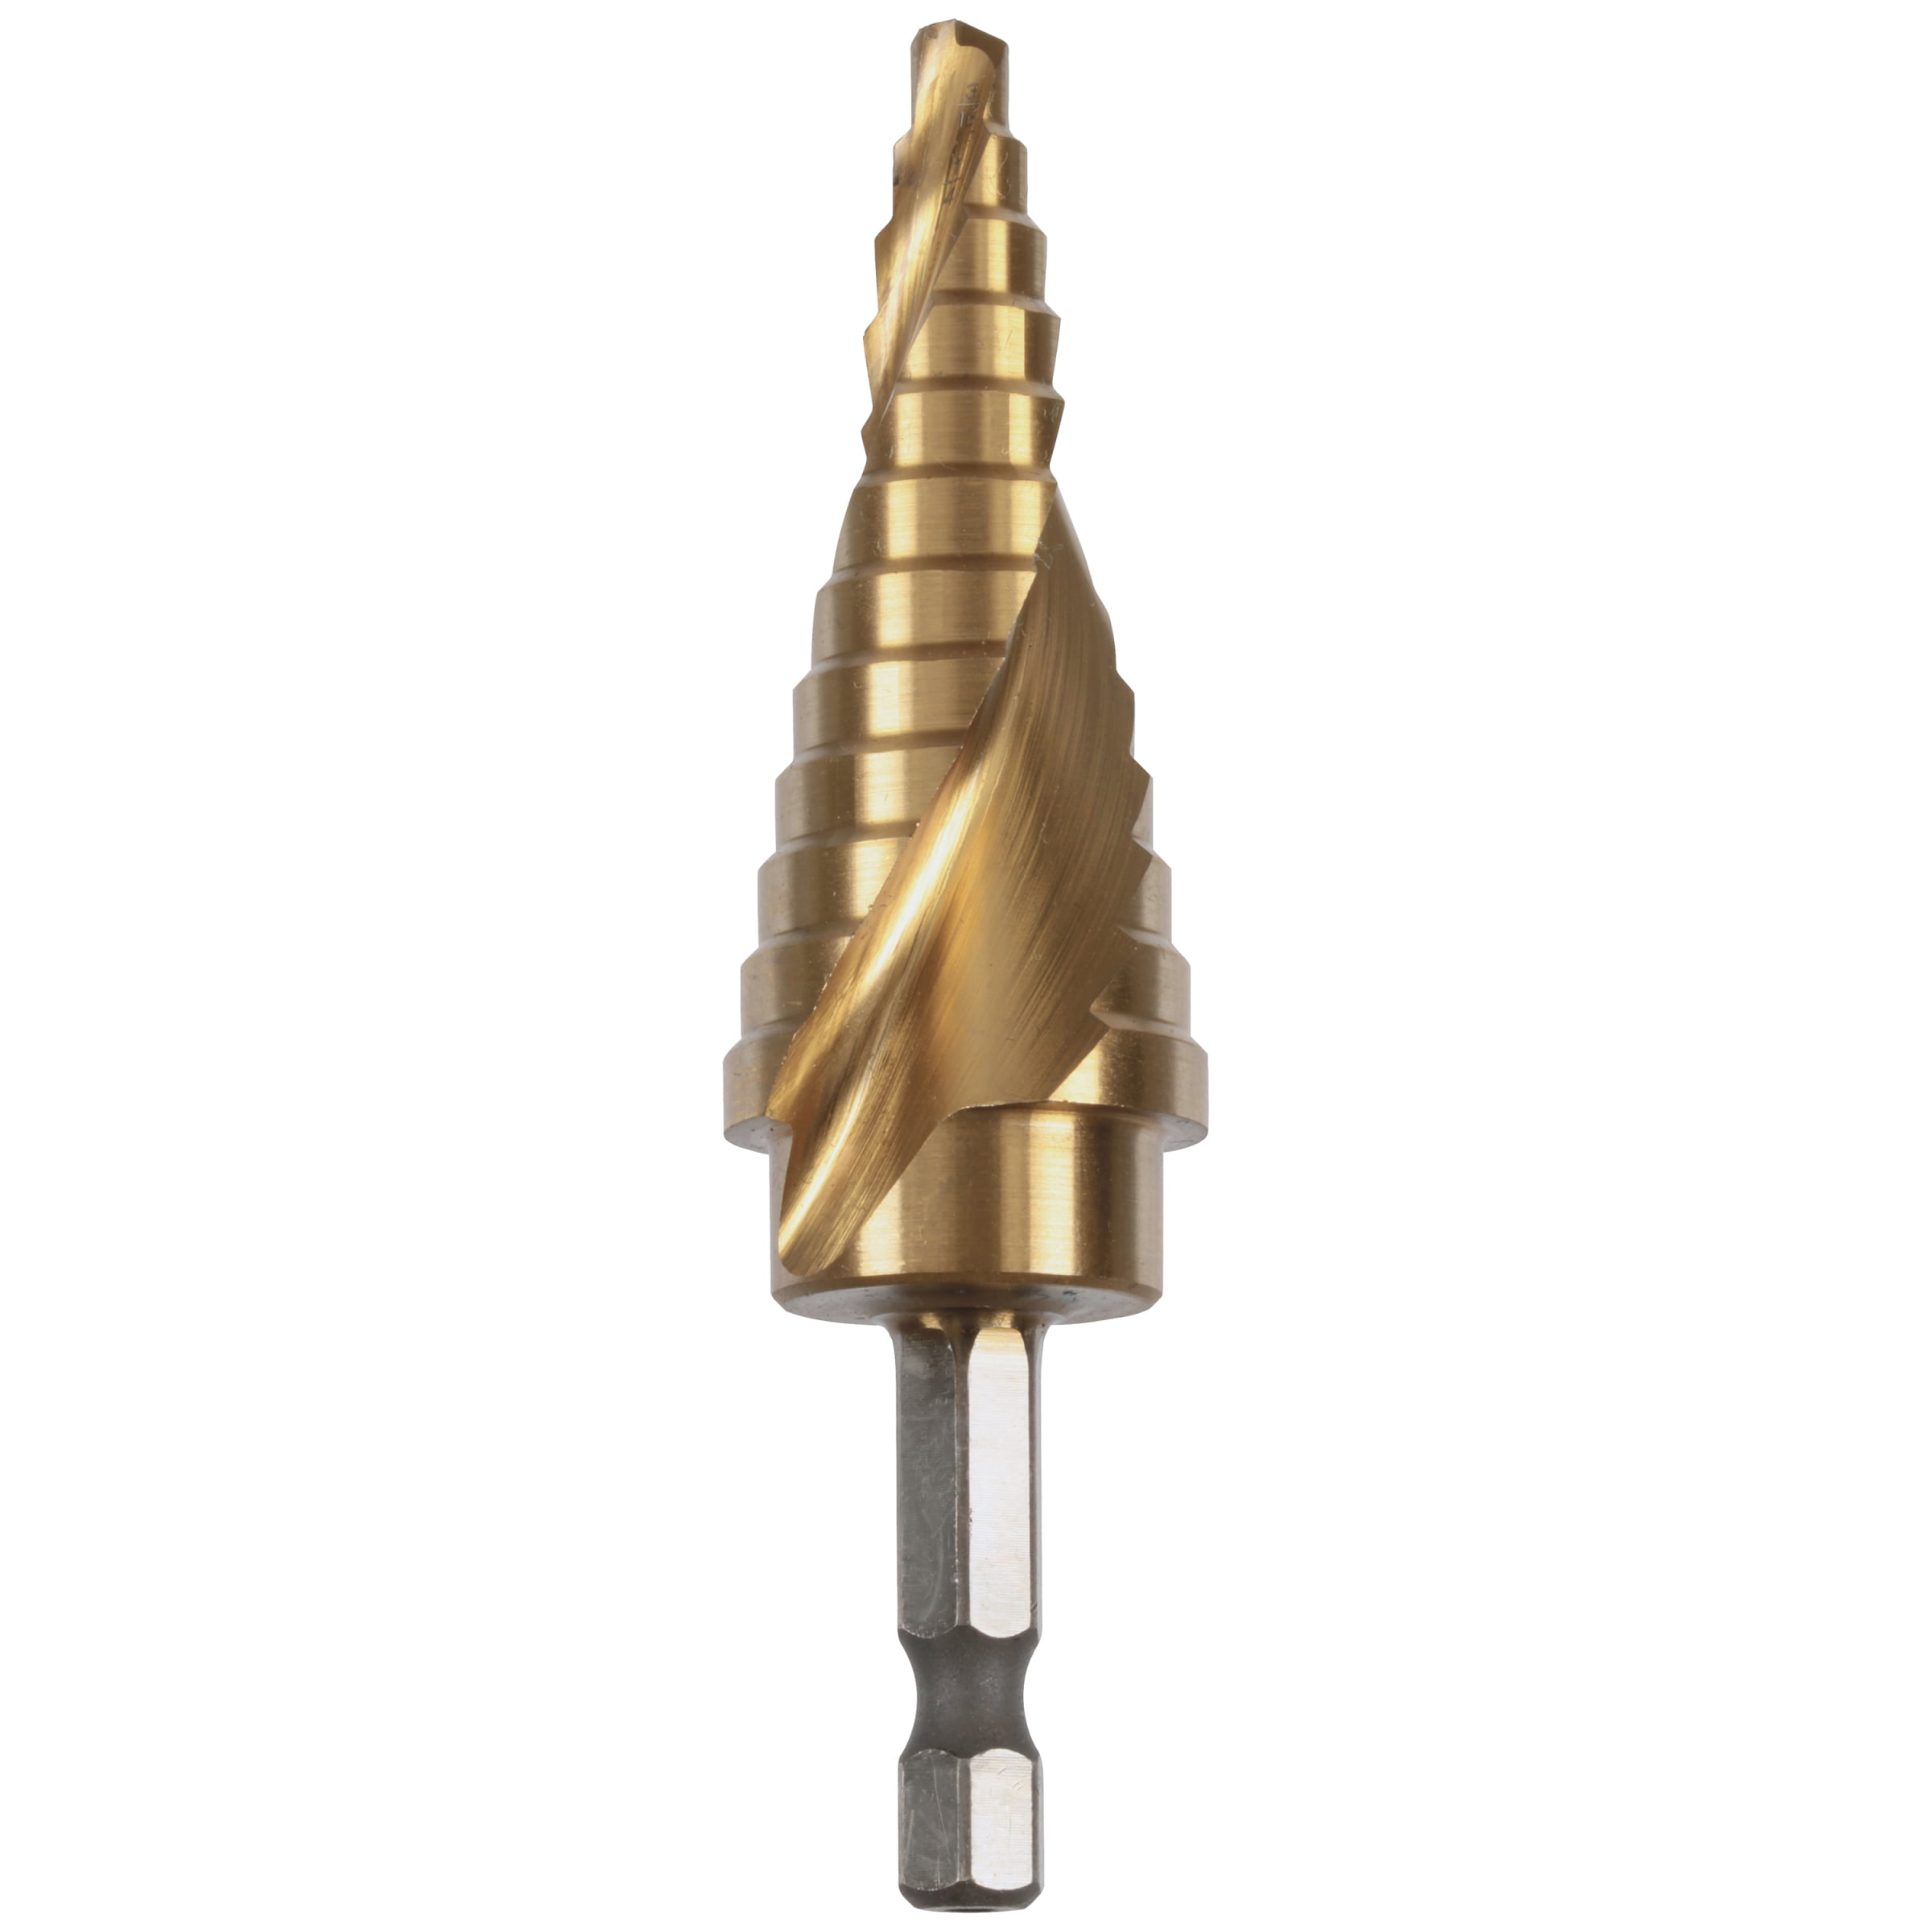 Two Size: 7/8 Inch 1/4 Inch 22.2 mm and 1-1/8 Inch 28.6 mm 6.4 mm TEMO M35 Cobalt Step Drill Spiral Flute Hex Shank 